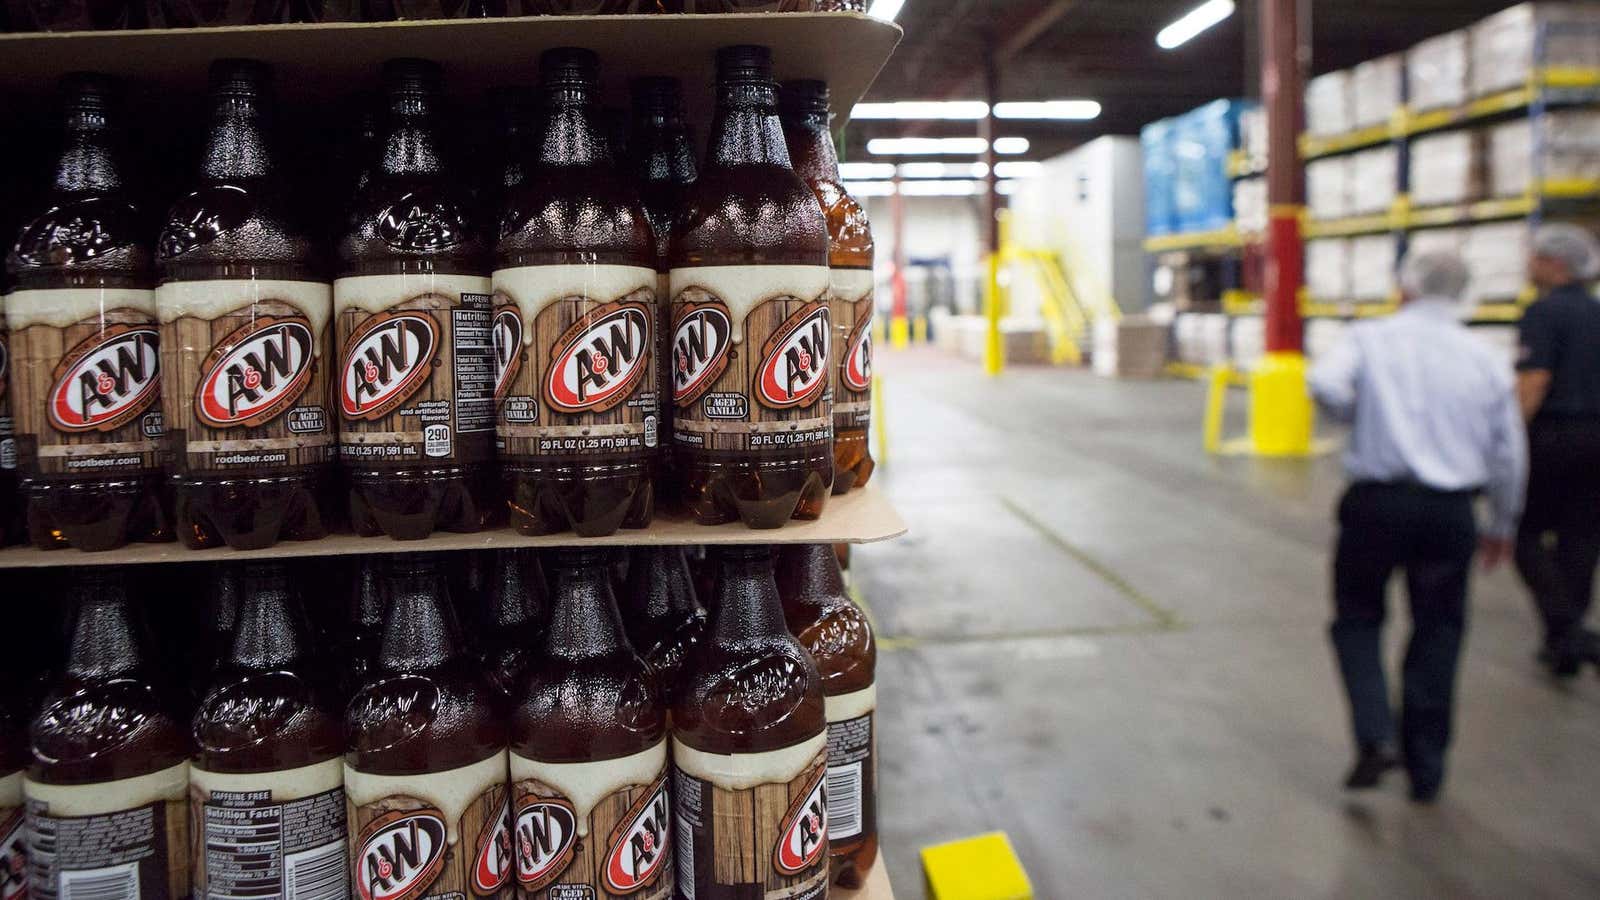 Much of the world finds root beer repellant.